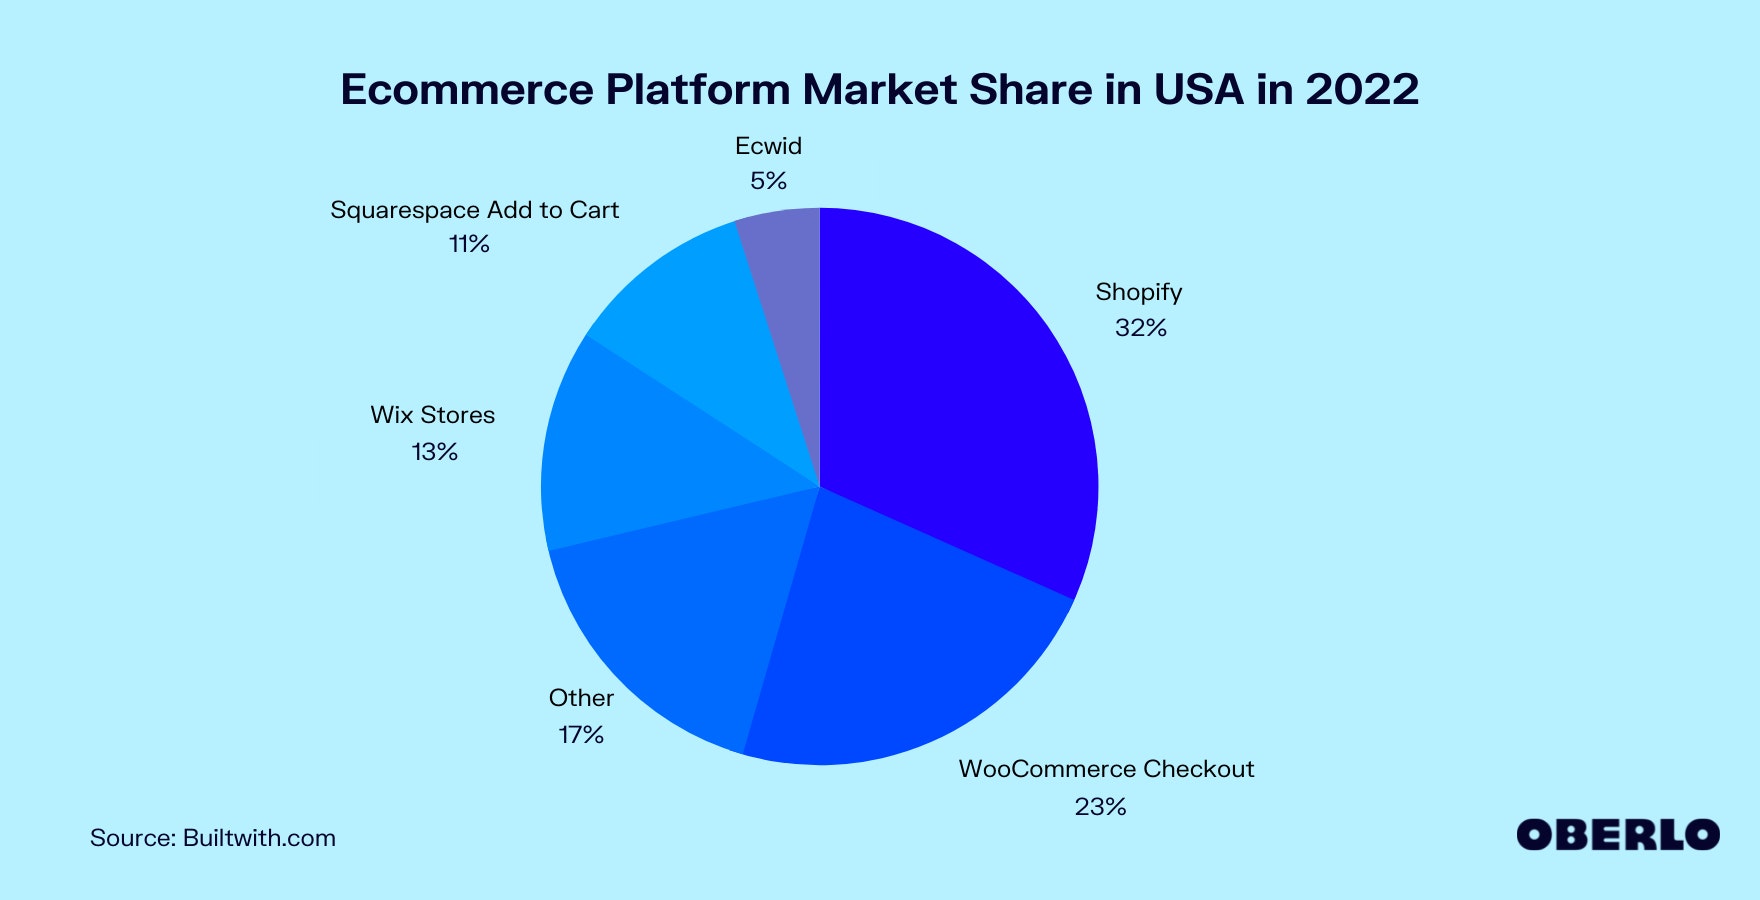 Chart of Ecommerce Platform Market Share in the USA